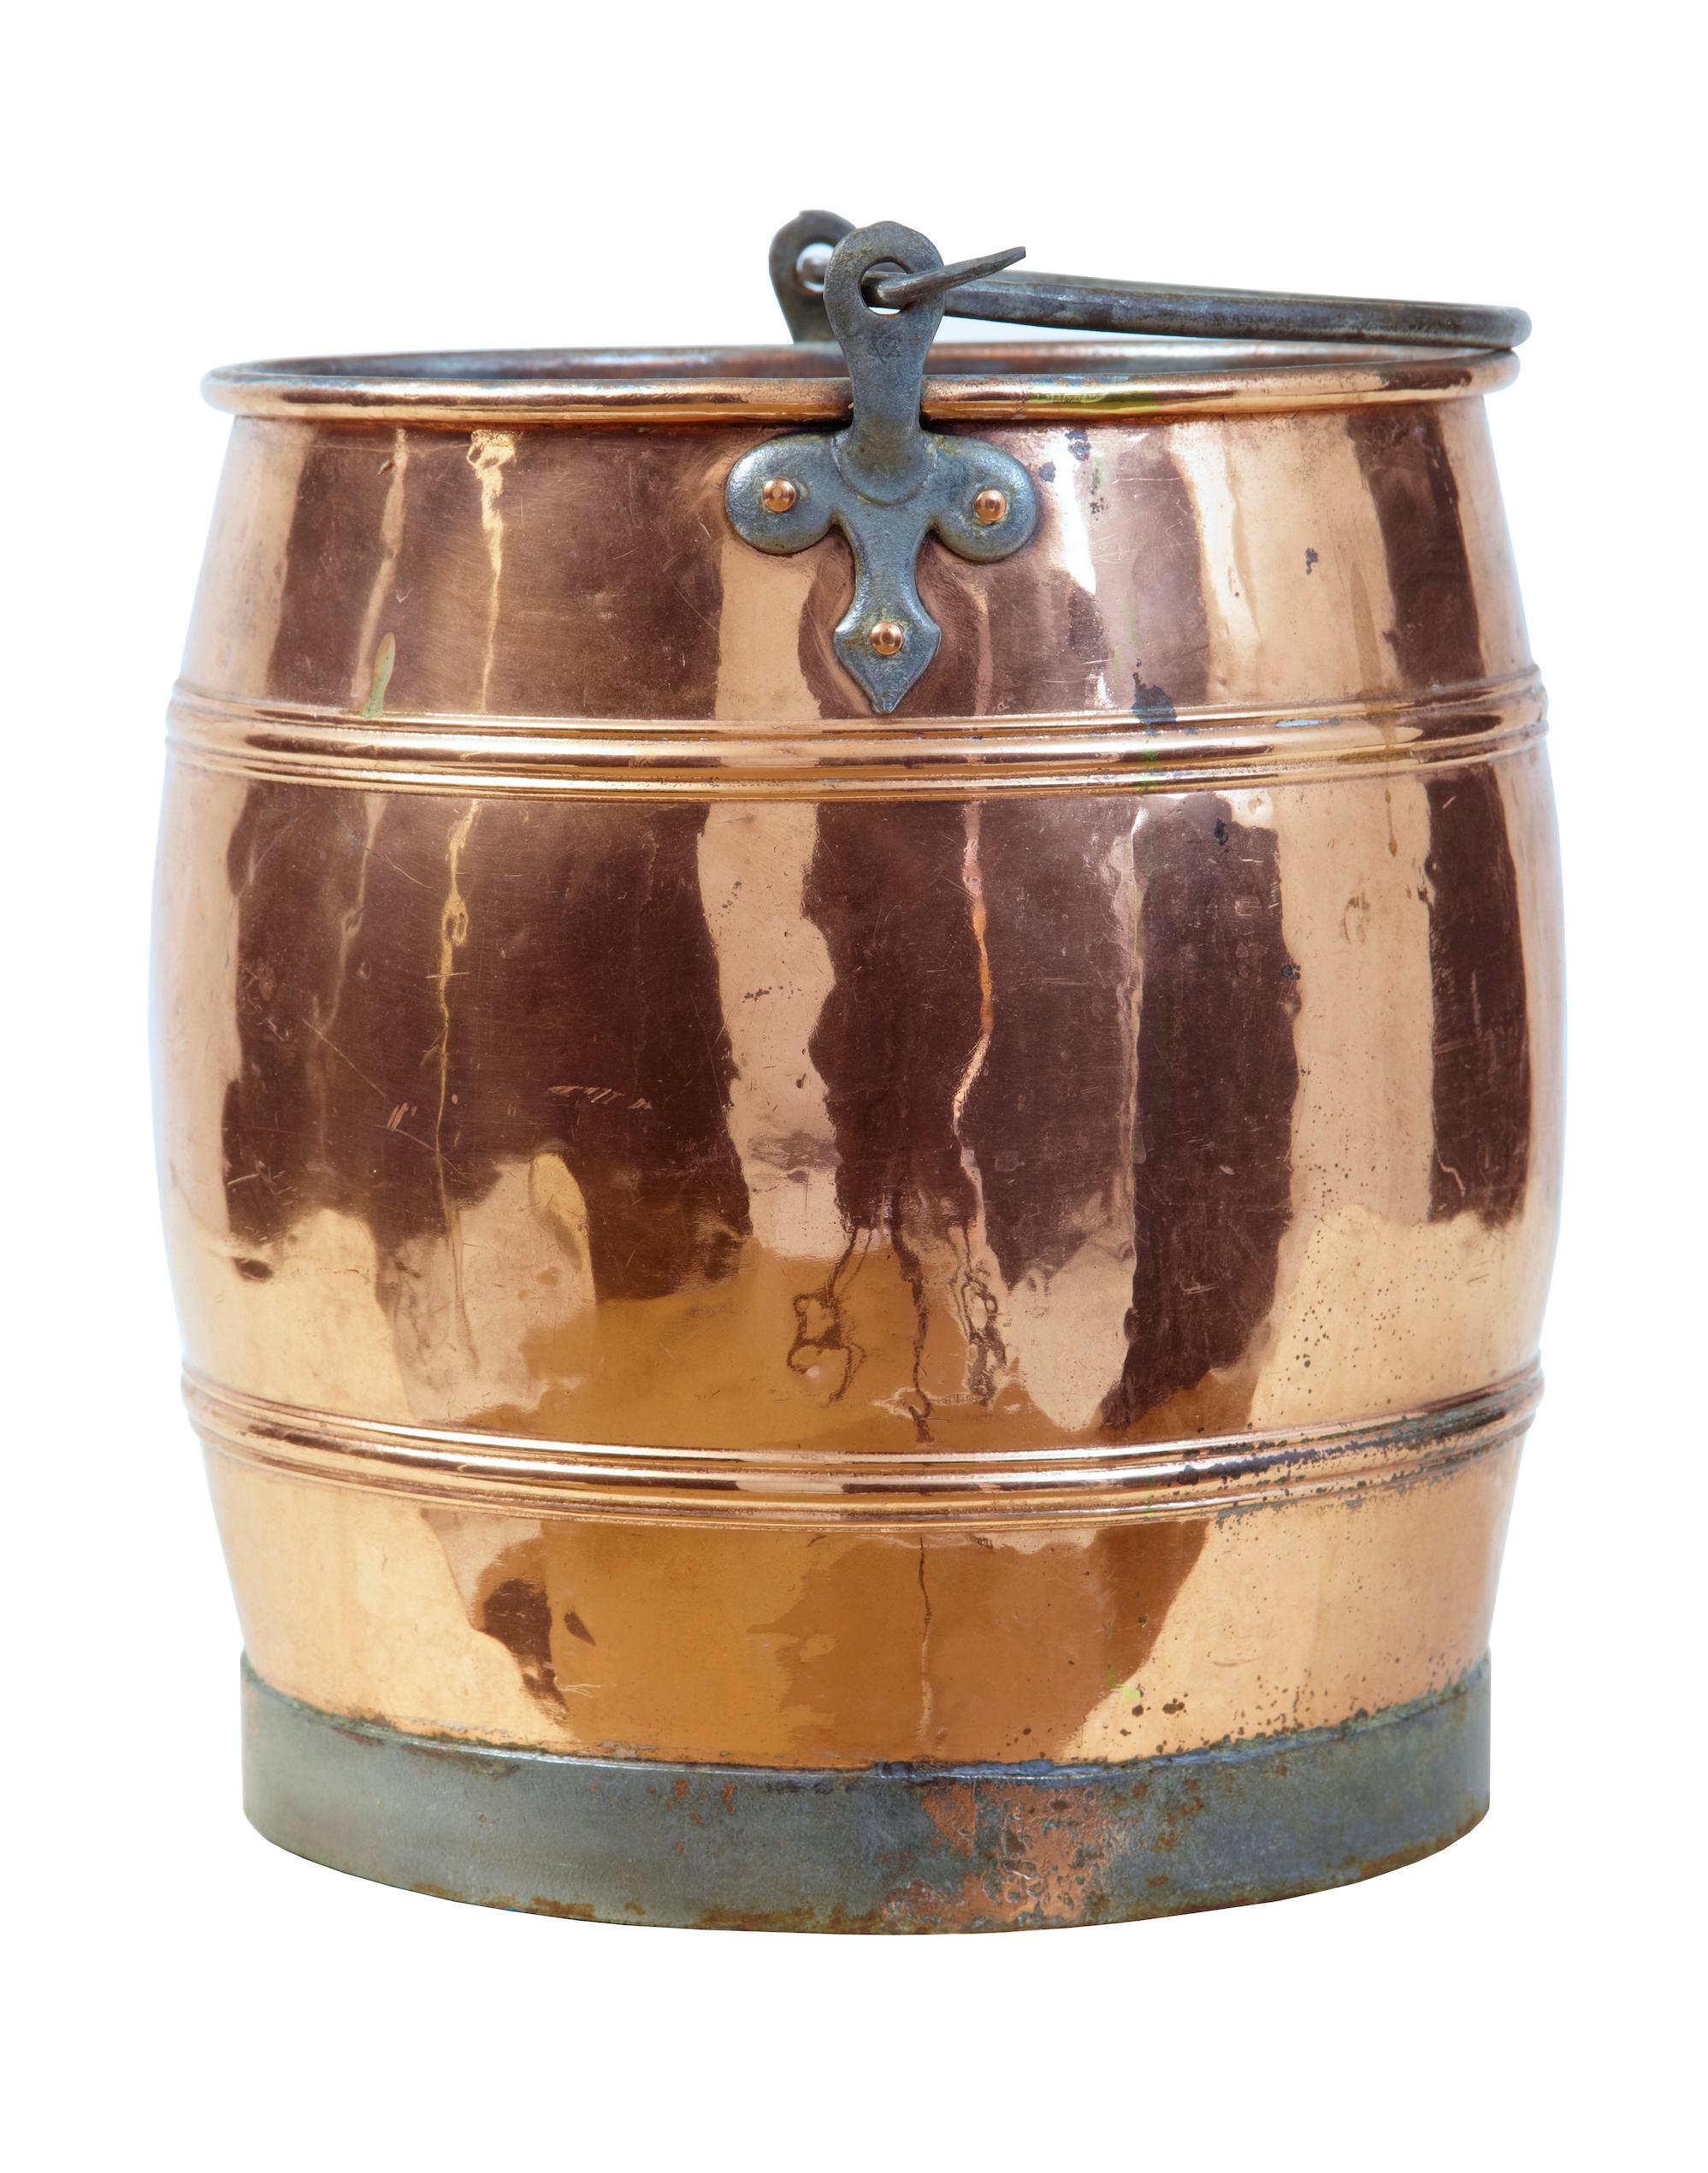 Arts & Crafts Scandinavian copper bucket, circa 1890.

Good quality keg barrel shaped copper pail, with steel handle and bottom rim. Well crafted item and ideal for use as a log bin or waste paper basket.

Expected surface marks.